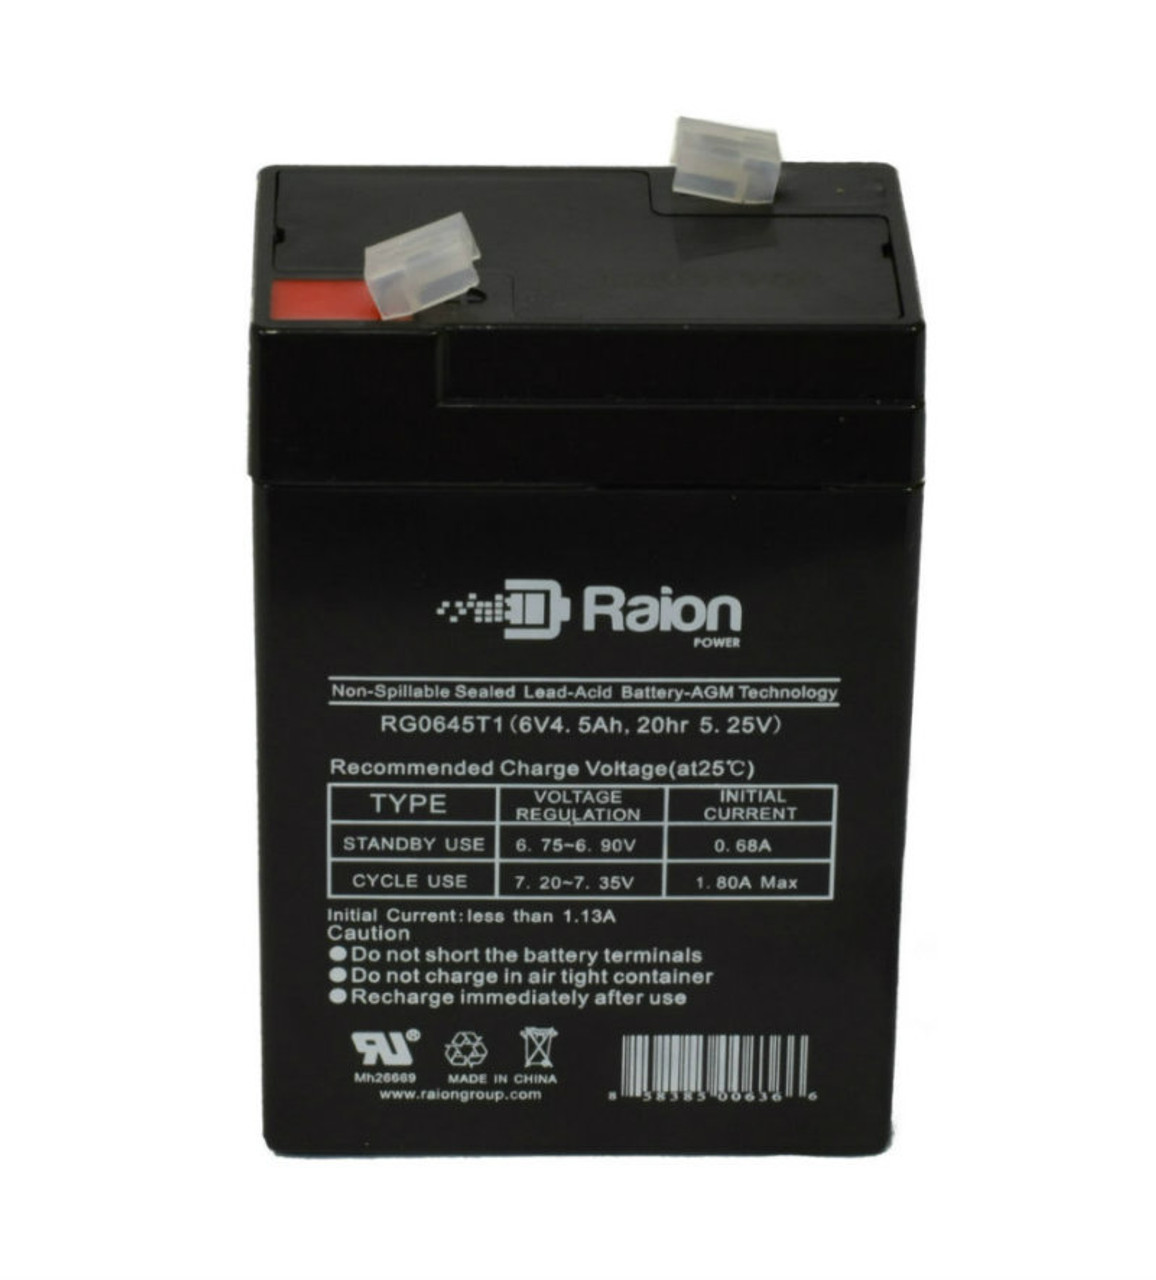 Raion Power RG0645T1 Replacement Battery Cartridge for Welch Allyn CP100 ECG